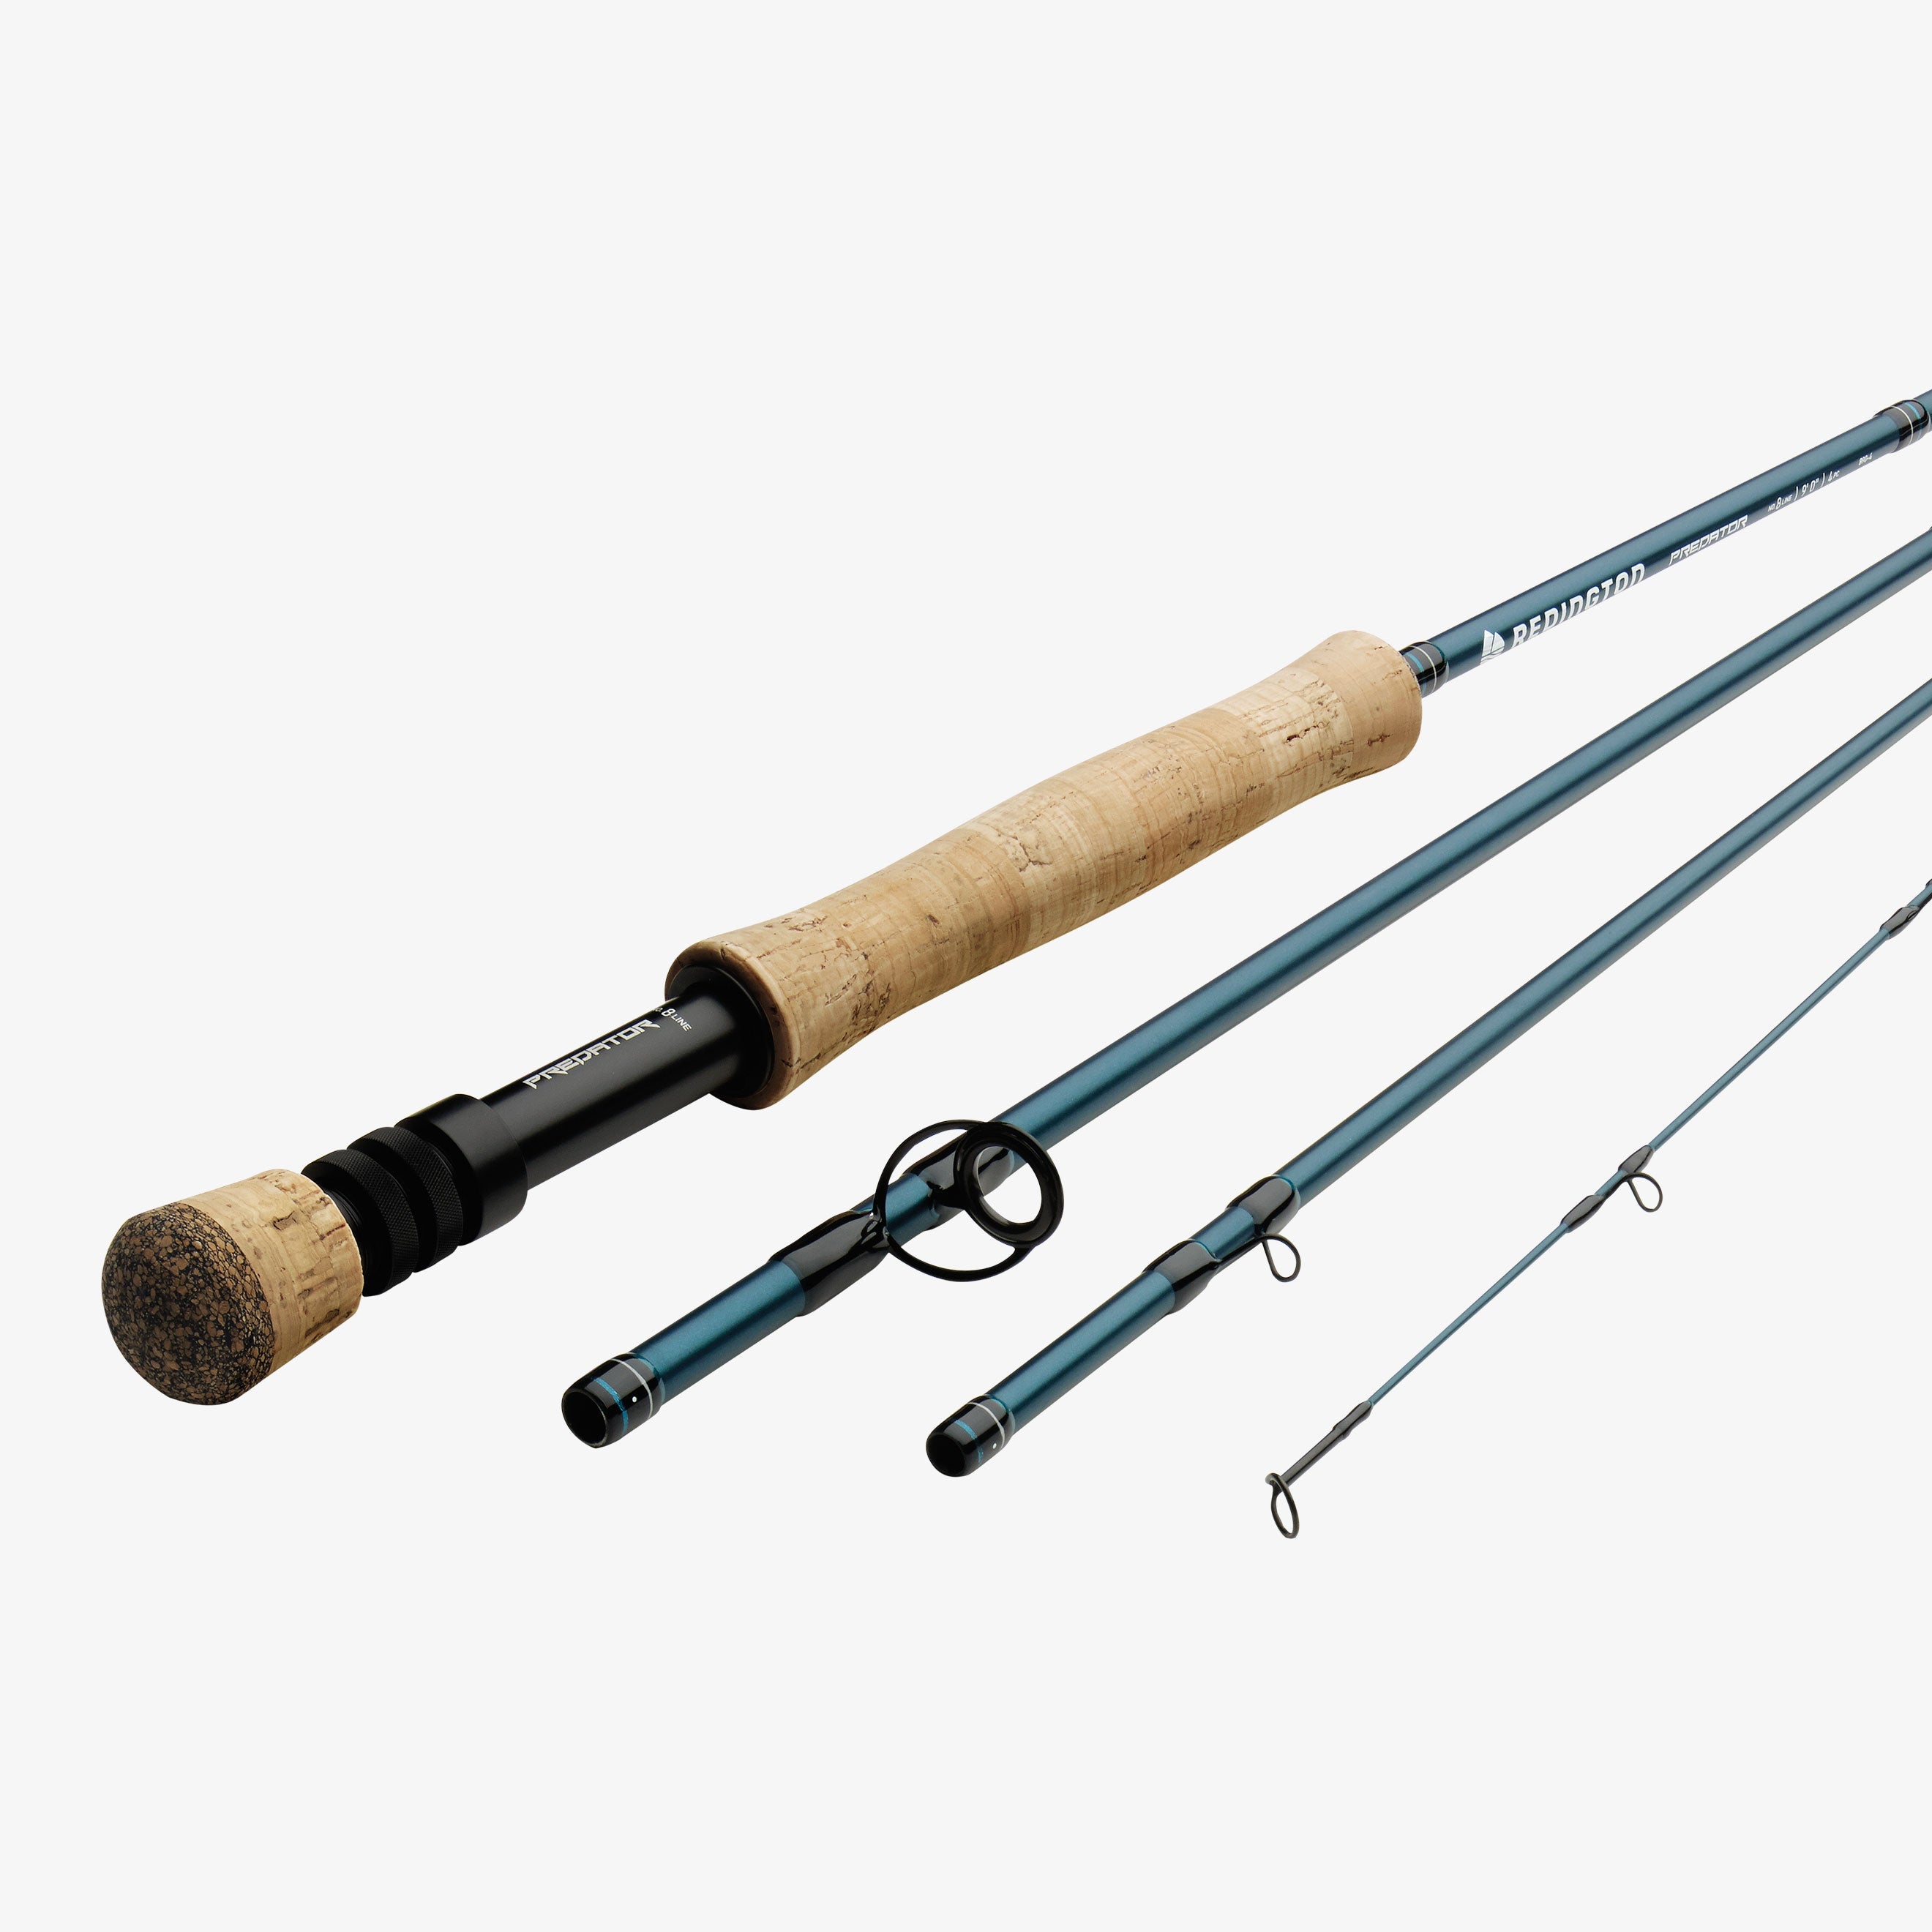 TFO BC Big Fly 10wt 9'0, Muskie Fly Rod, Lifetime Warranty - FREE  SHIPPING